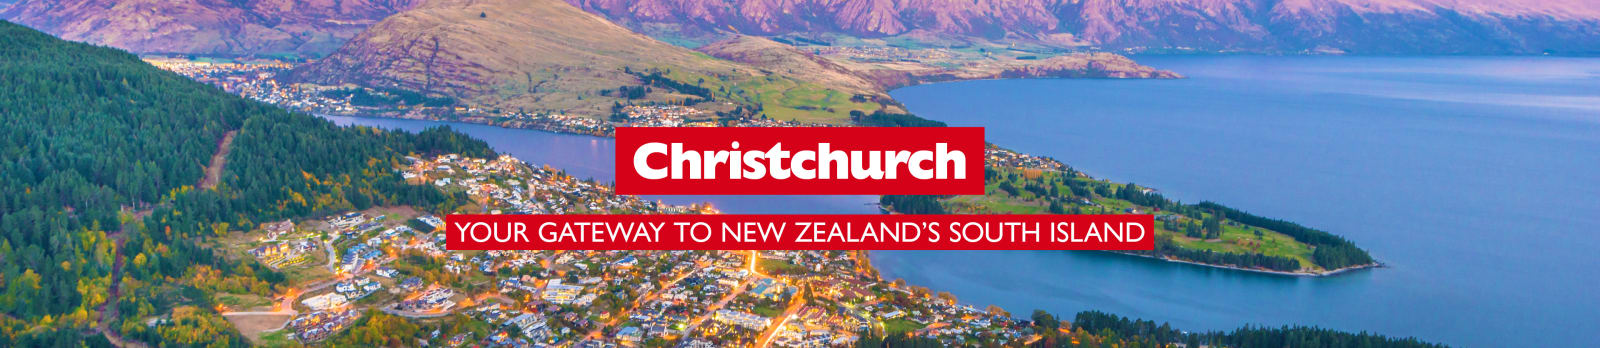 Christchurch - your gateway to New Zealand's South Island